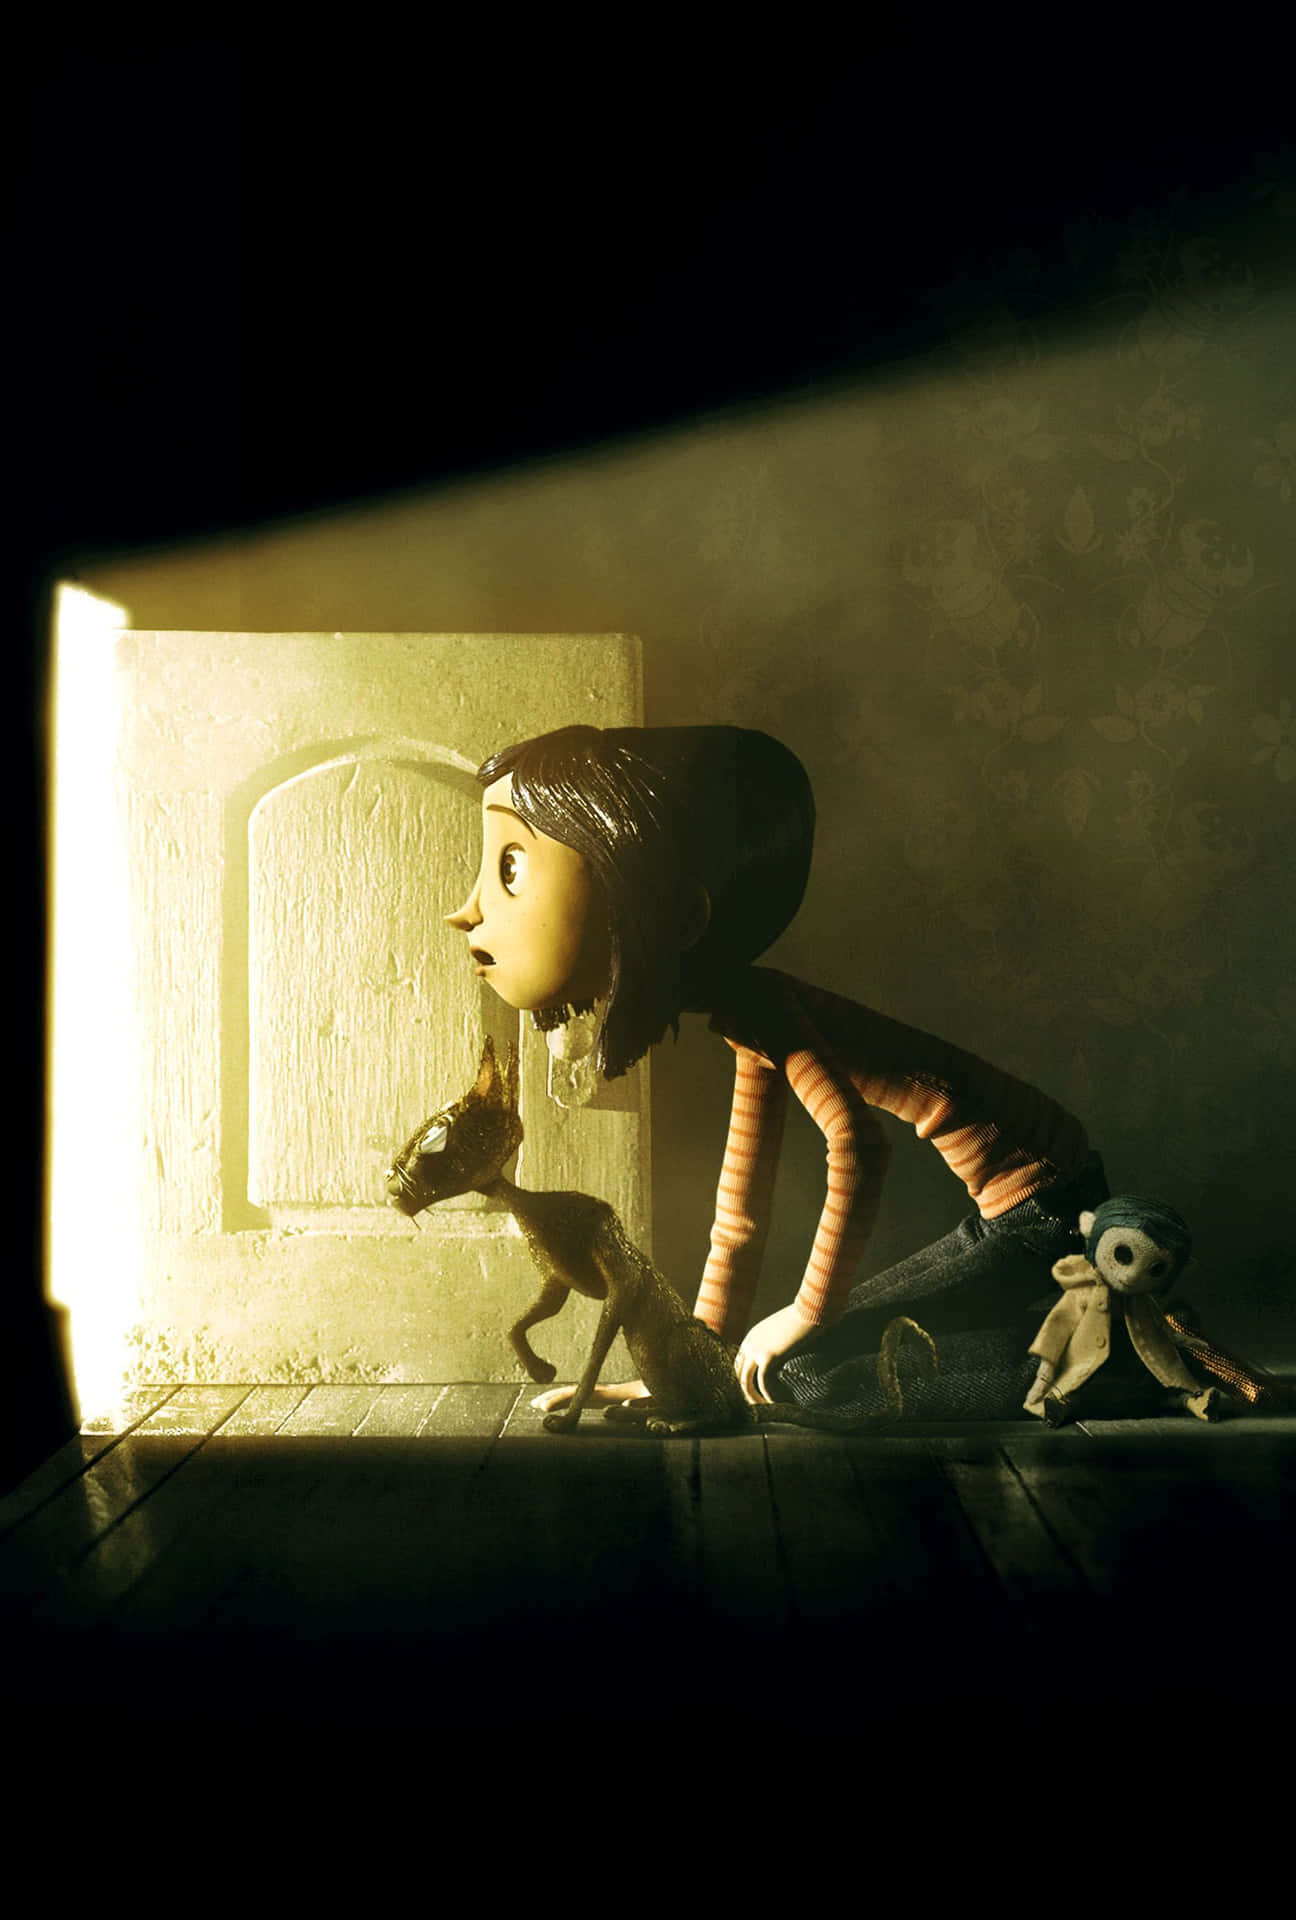 Coraline Steps onto a Magical Door-Shaped Road